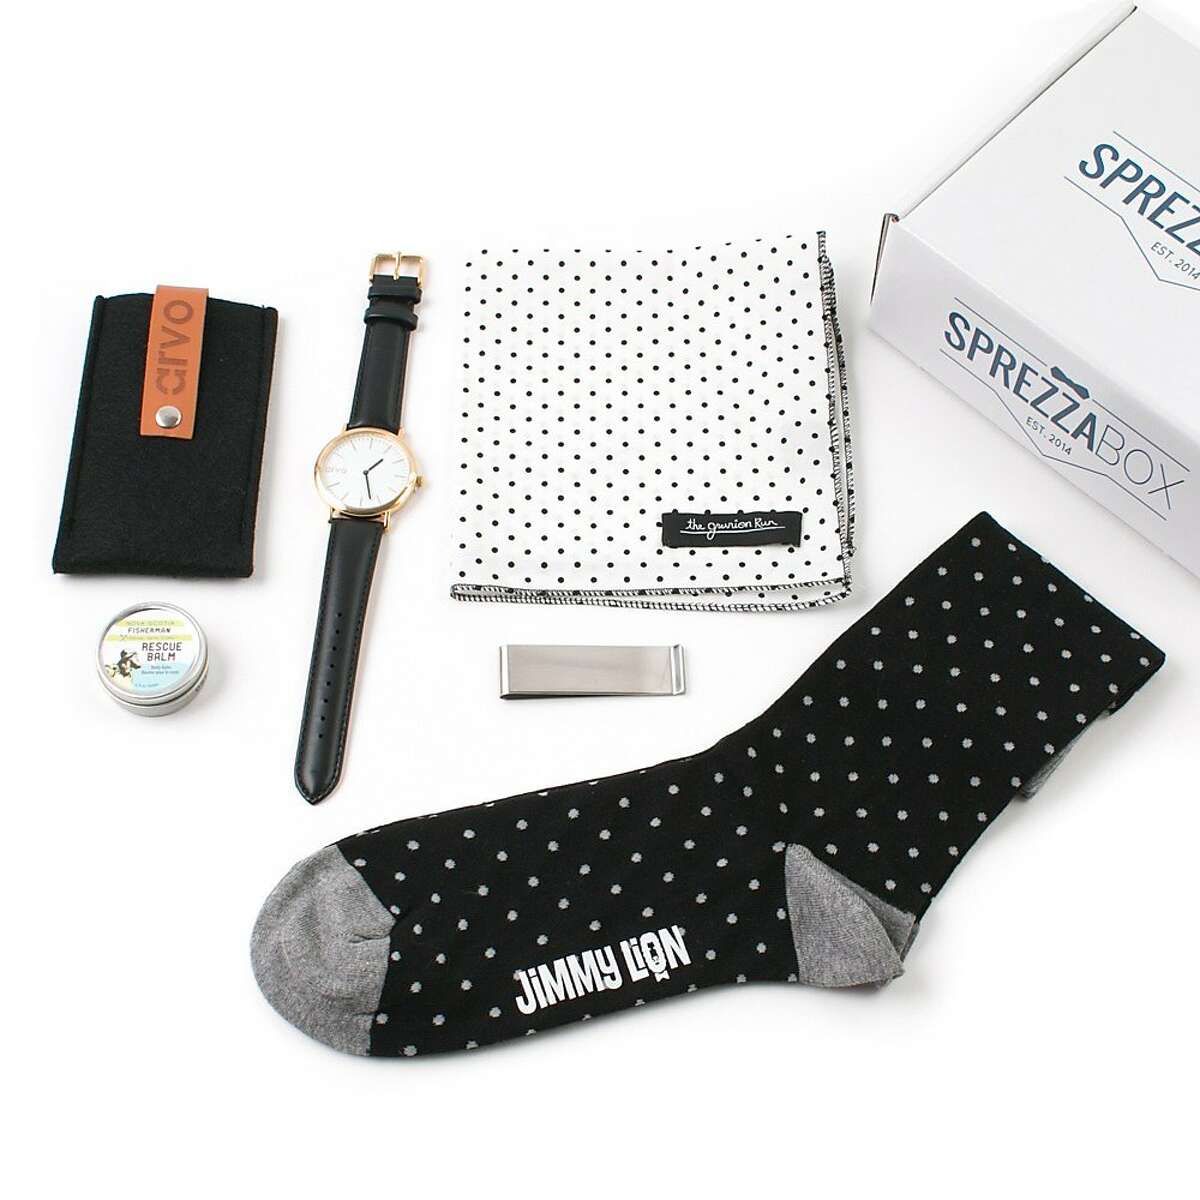 Sprezzabox. At $28 per month, Sprezzabox promises to upgrade your style with ties, watch straps, and shoehorns.